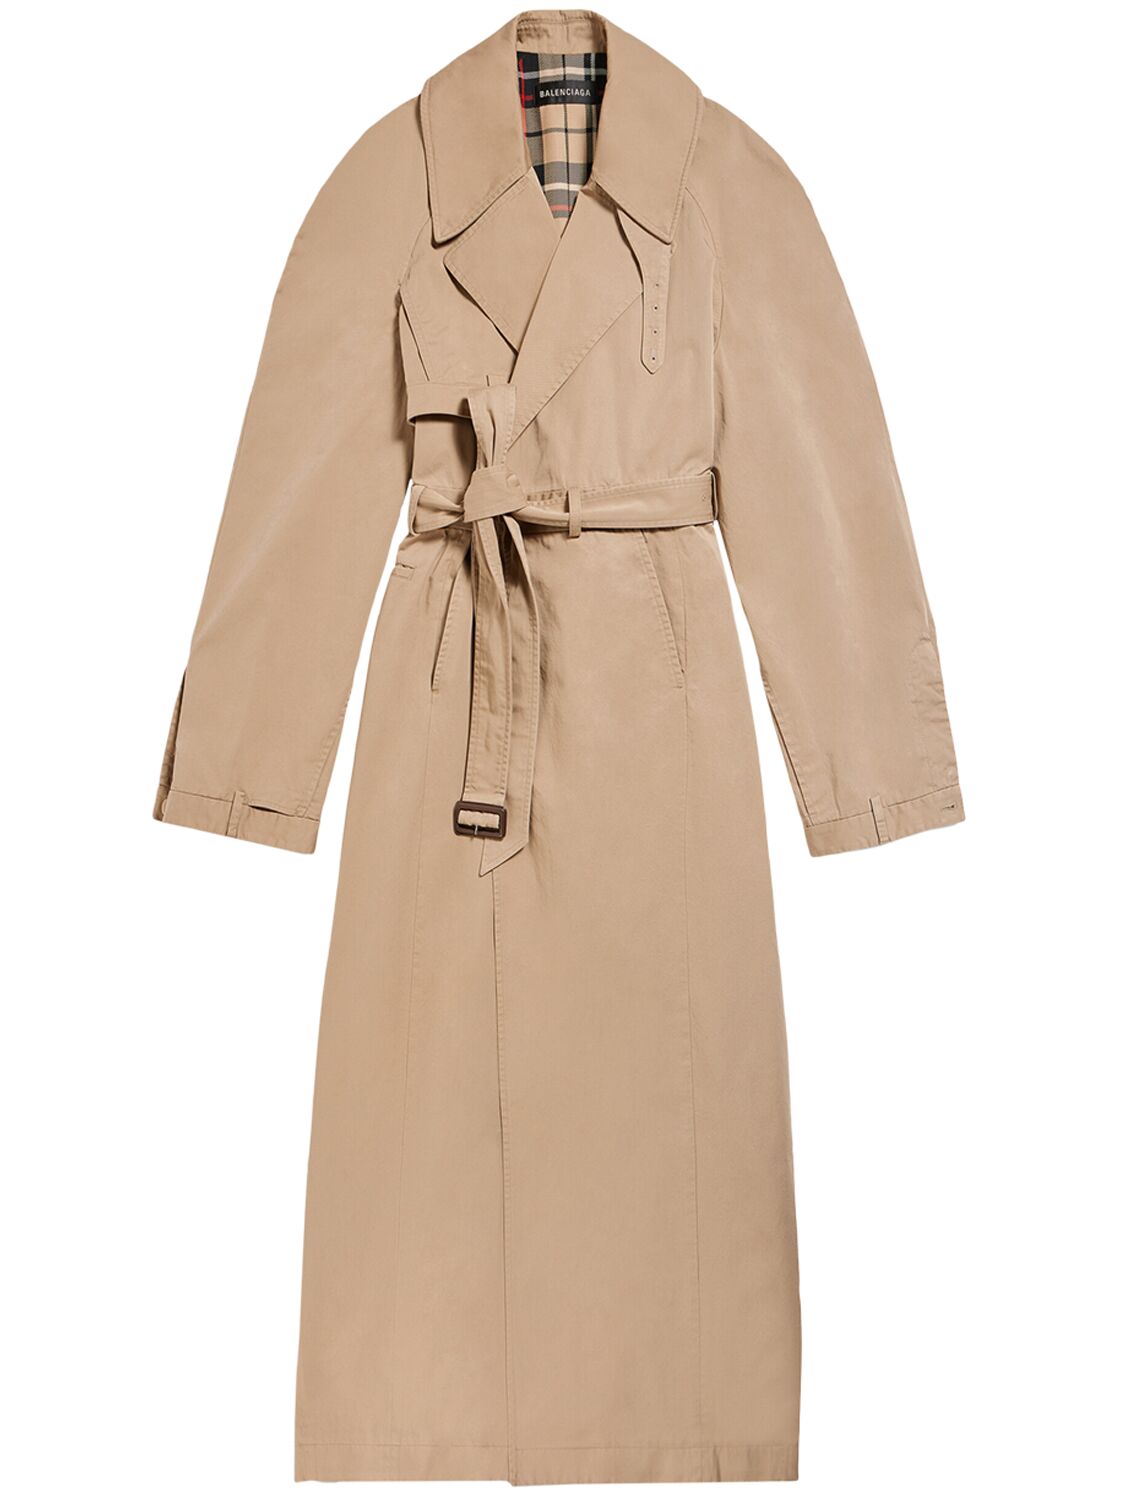 Image of Deconstructed Maxi Cotton Trench Coat